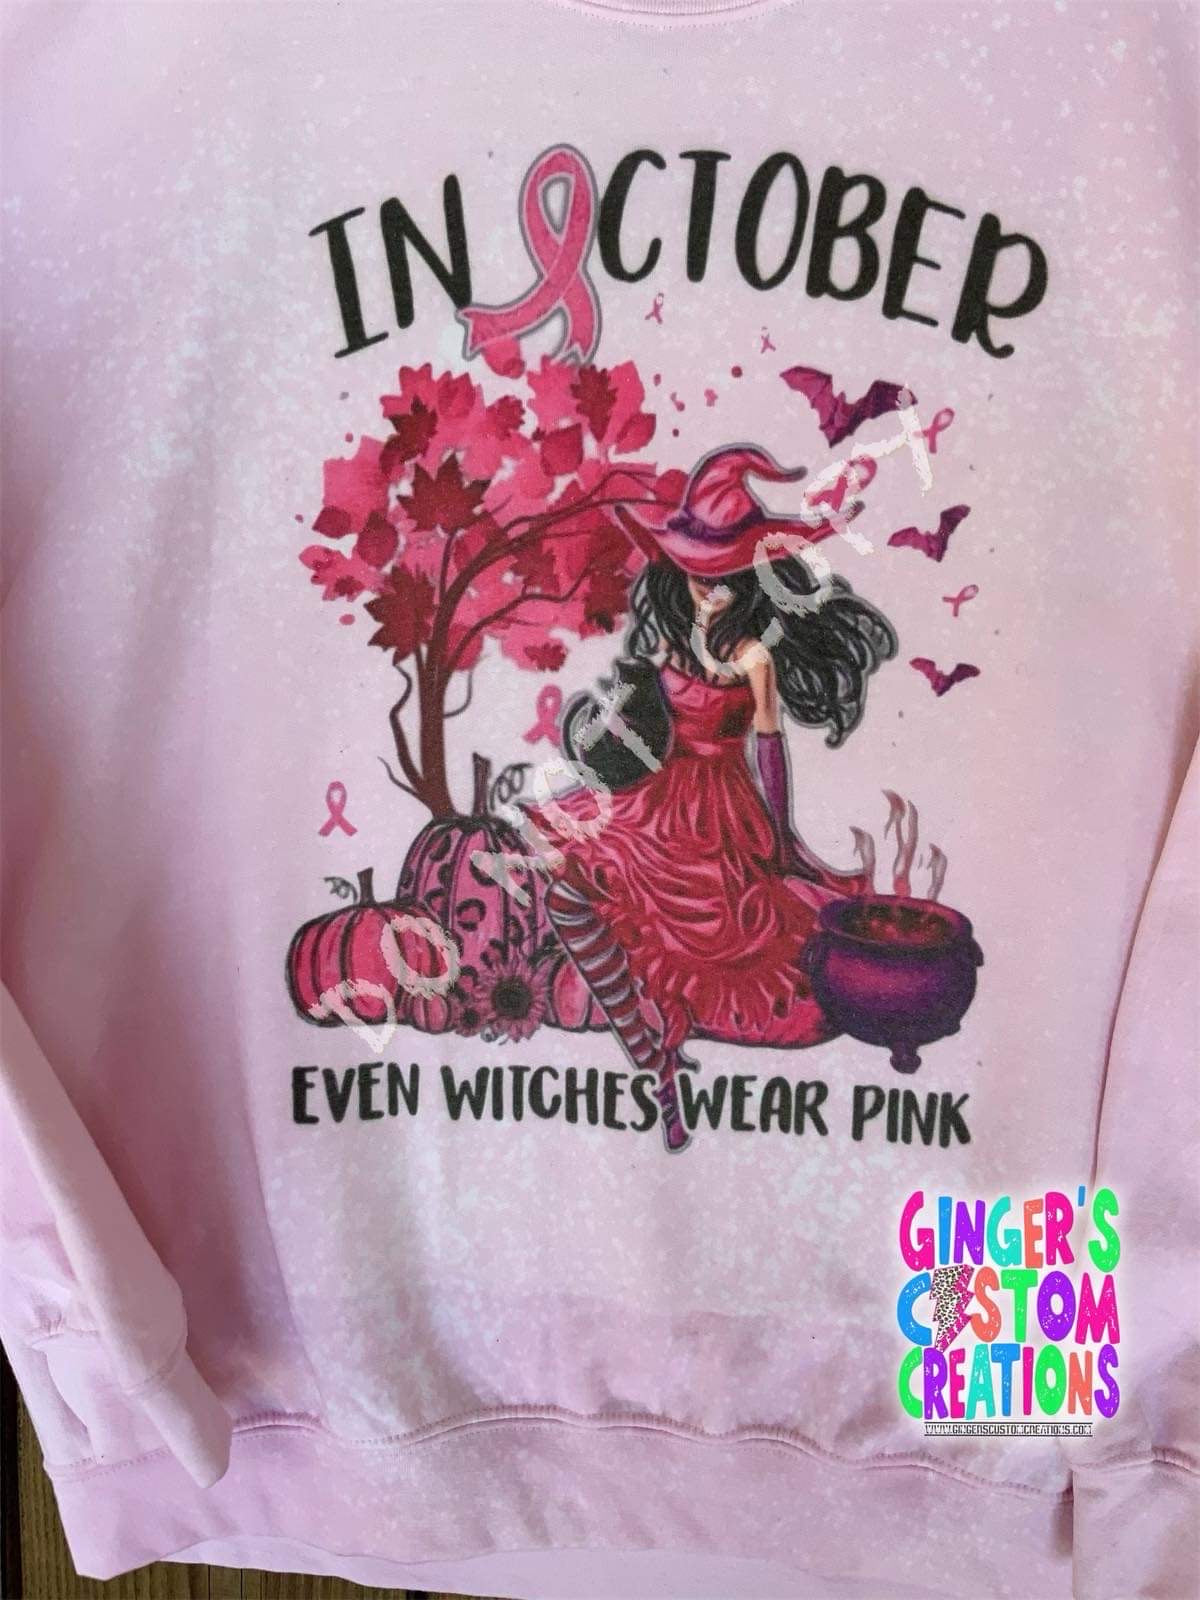 In october all witches wear pink  CREWNECK